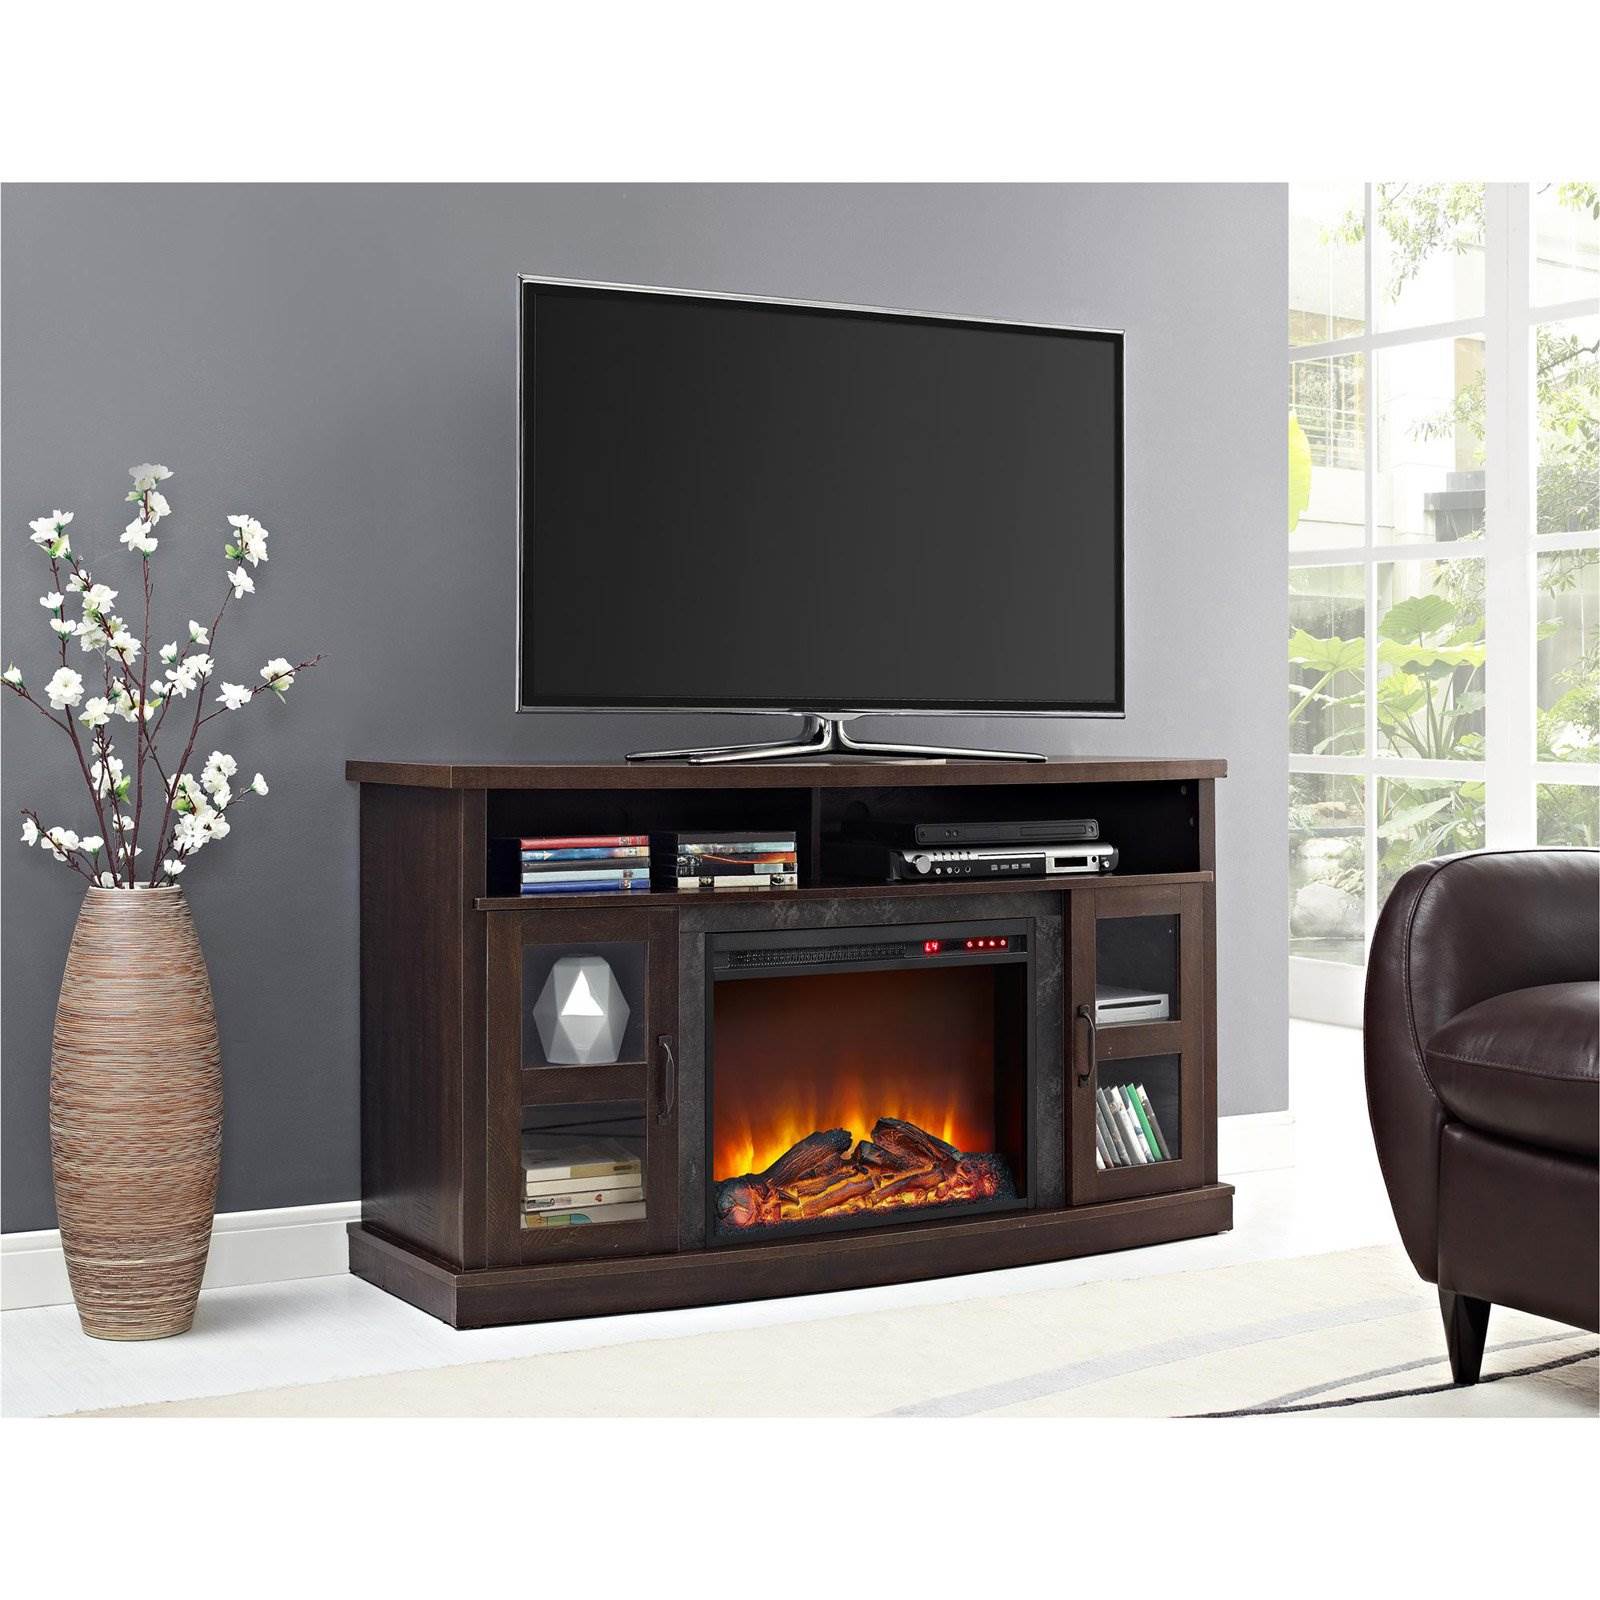 Electric Fireplace Heater Big Lots Unique White Electric Fireplace Tv Stand